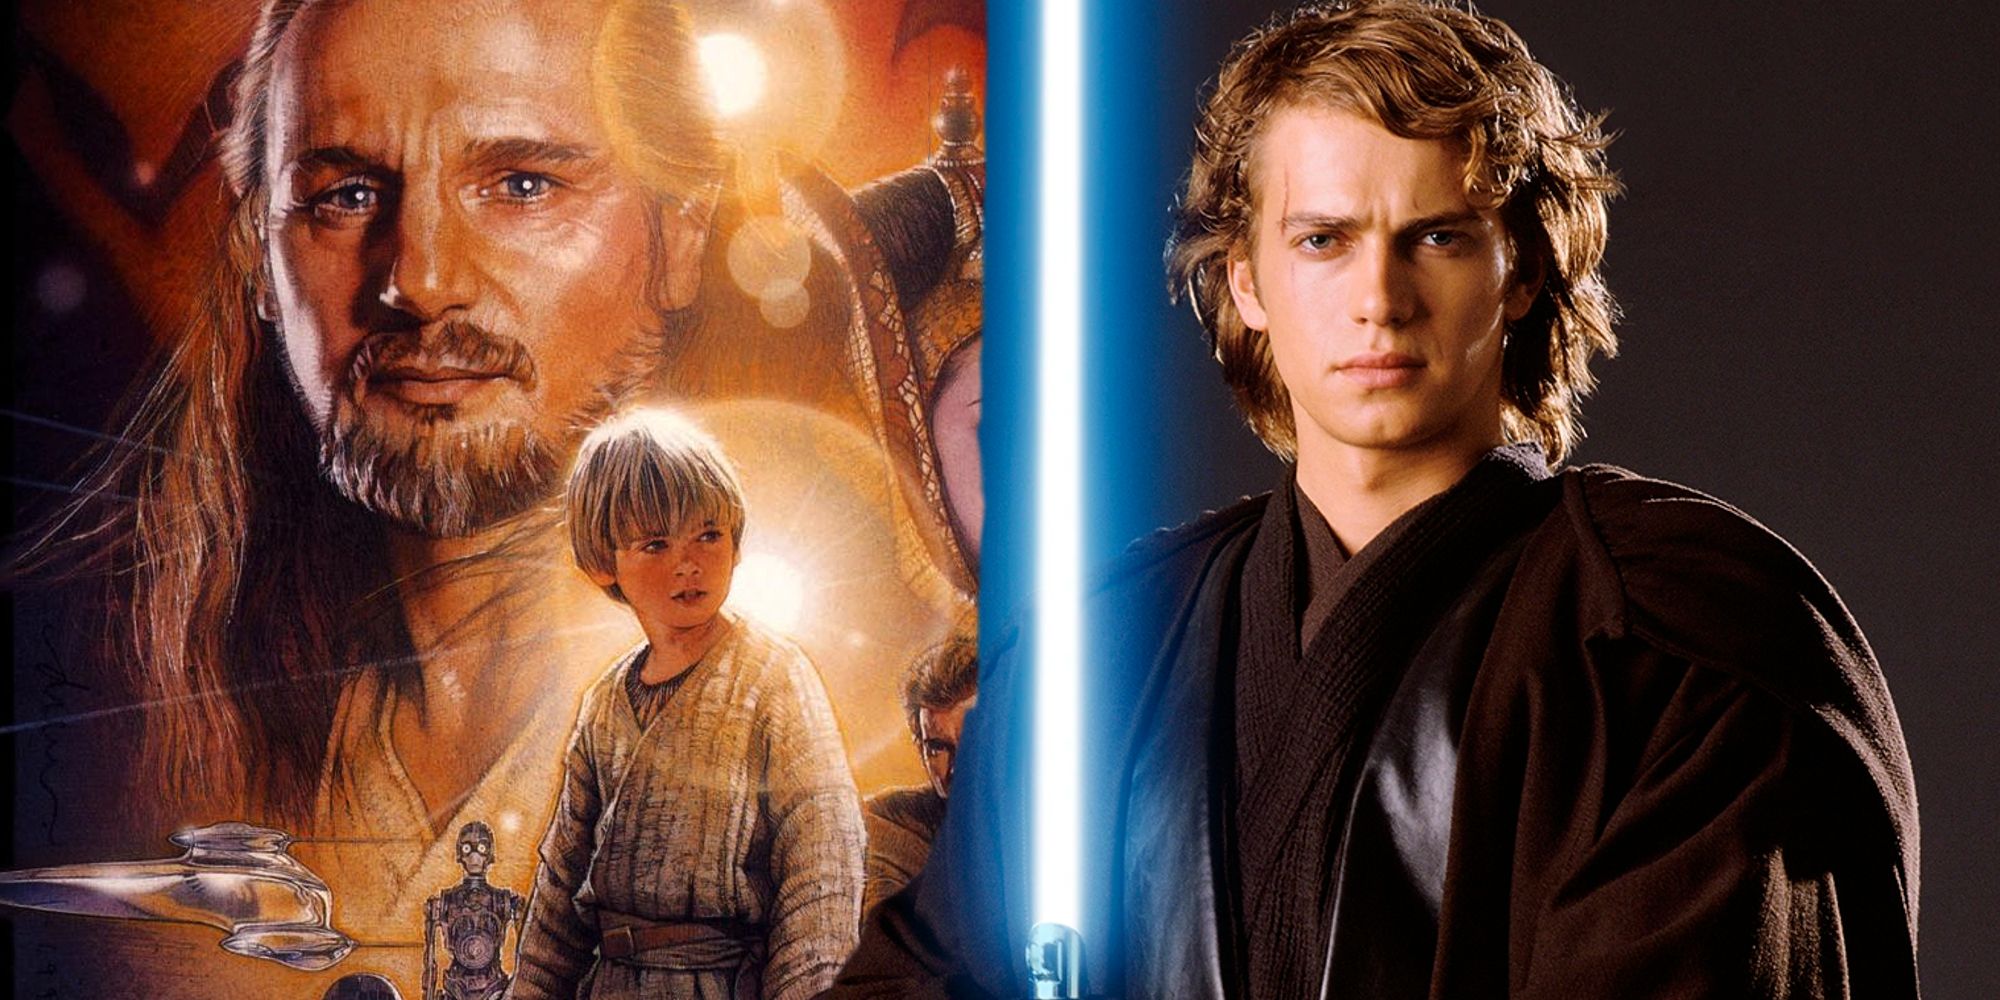 Anakin and the poster for Star Wars: Episode 1